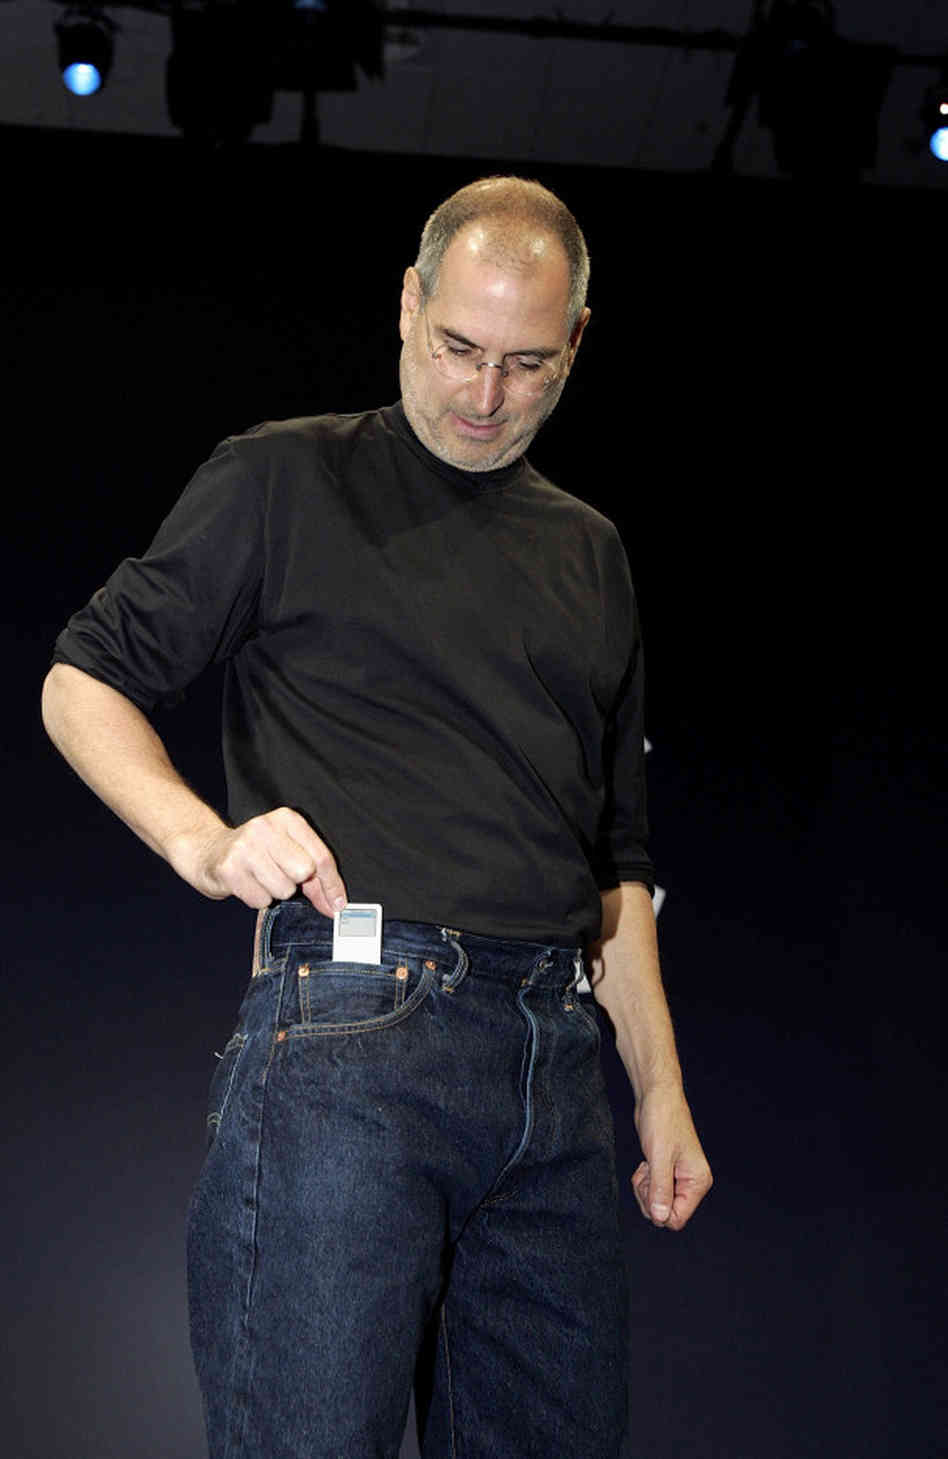 Steve Jobs changing the world